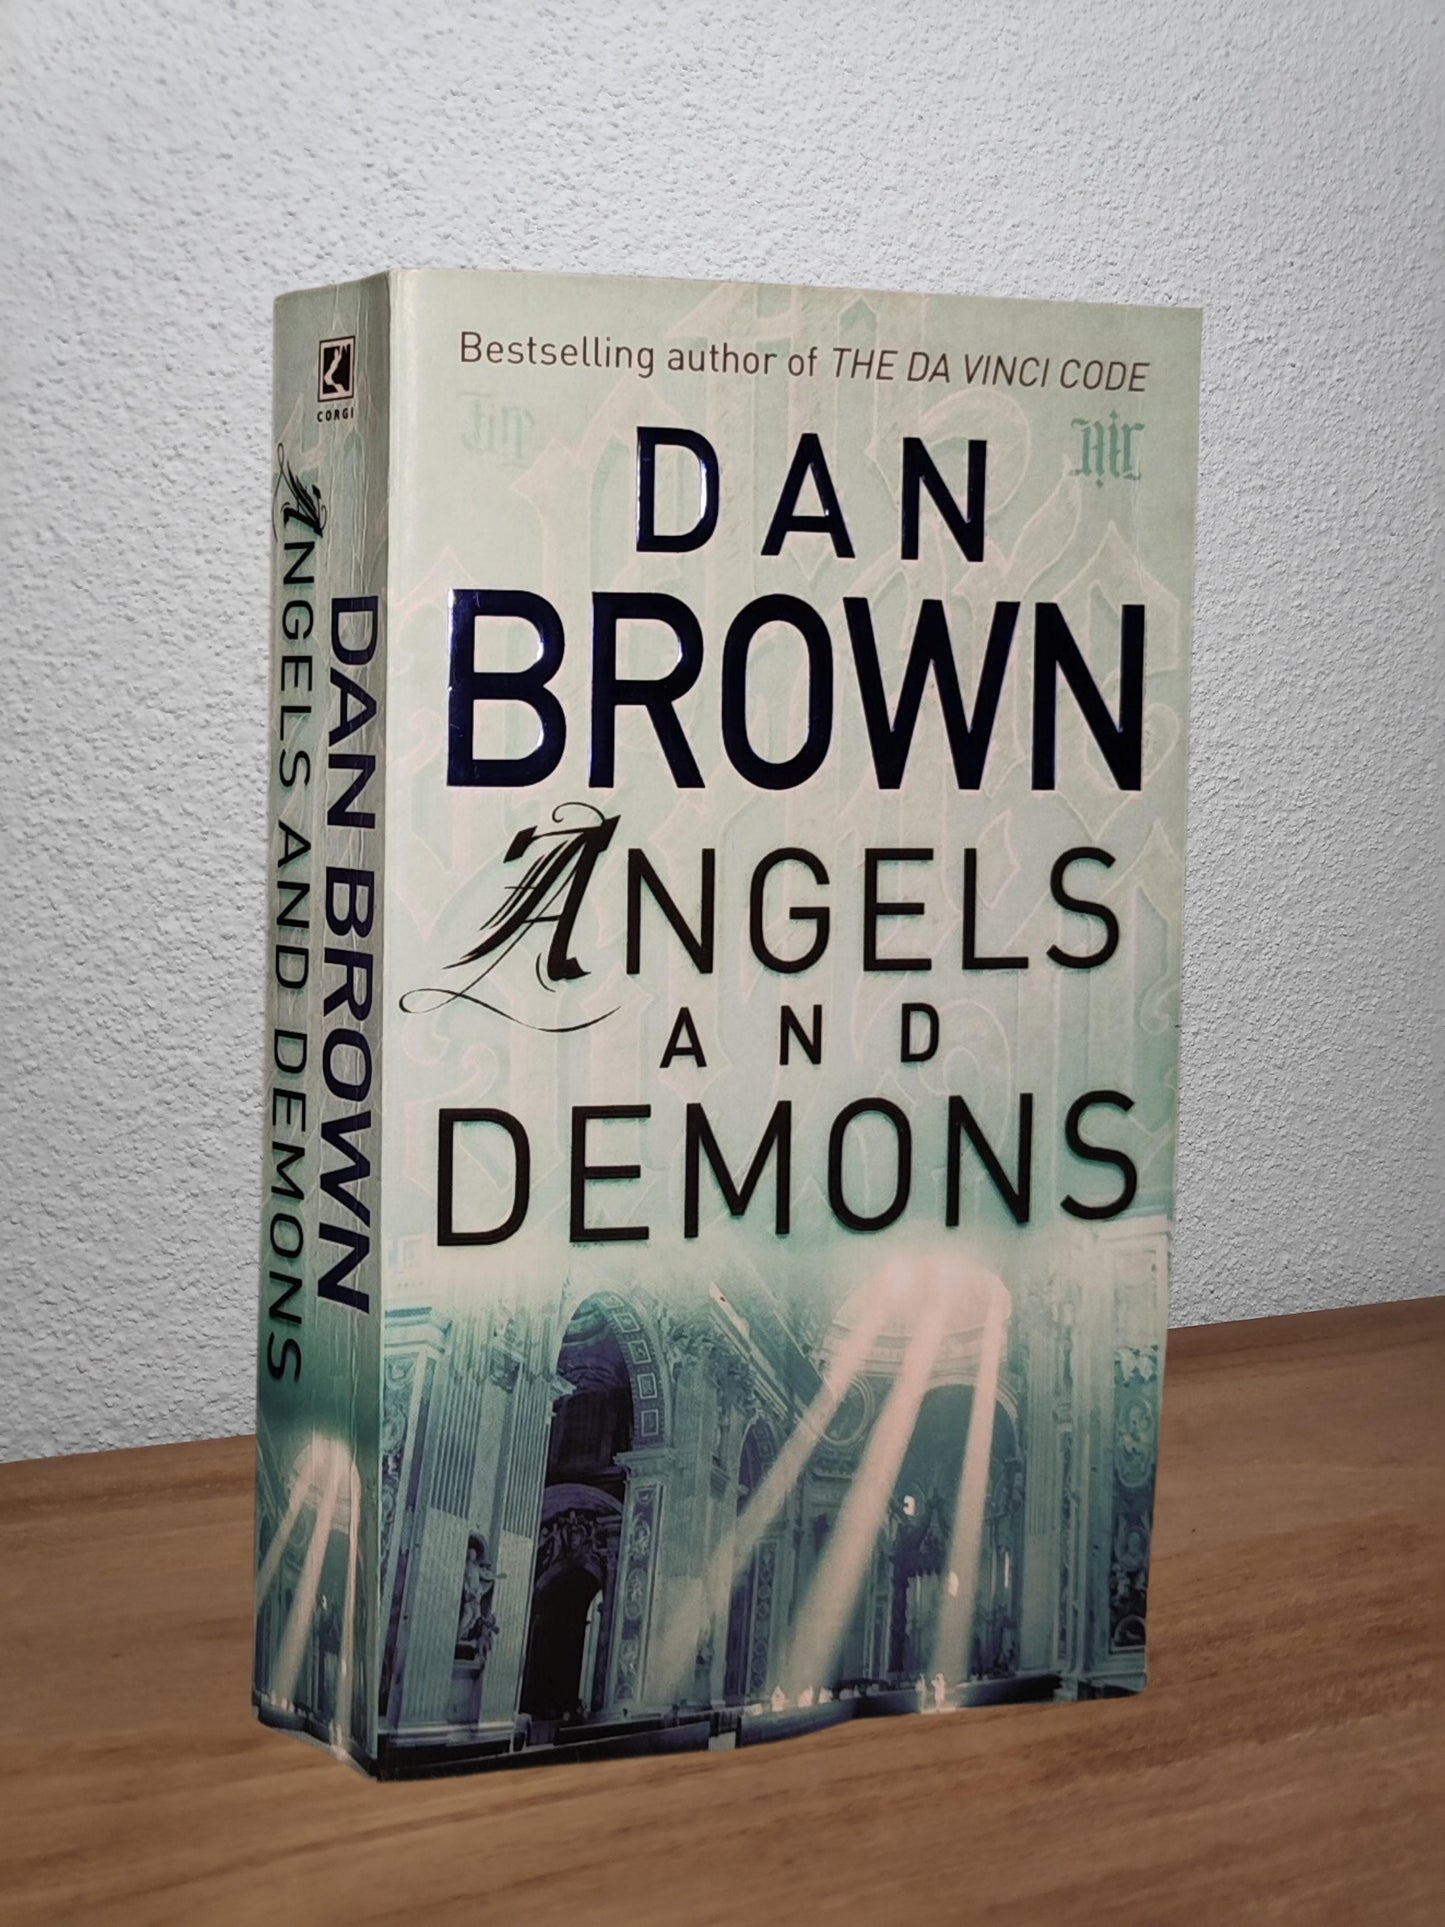 Dan Brown - Angels and Demons  - Second-hand english book to deliver in Zurich & Switzerland